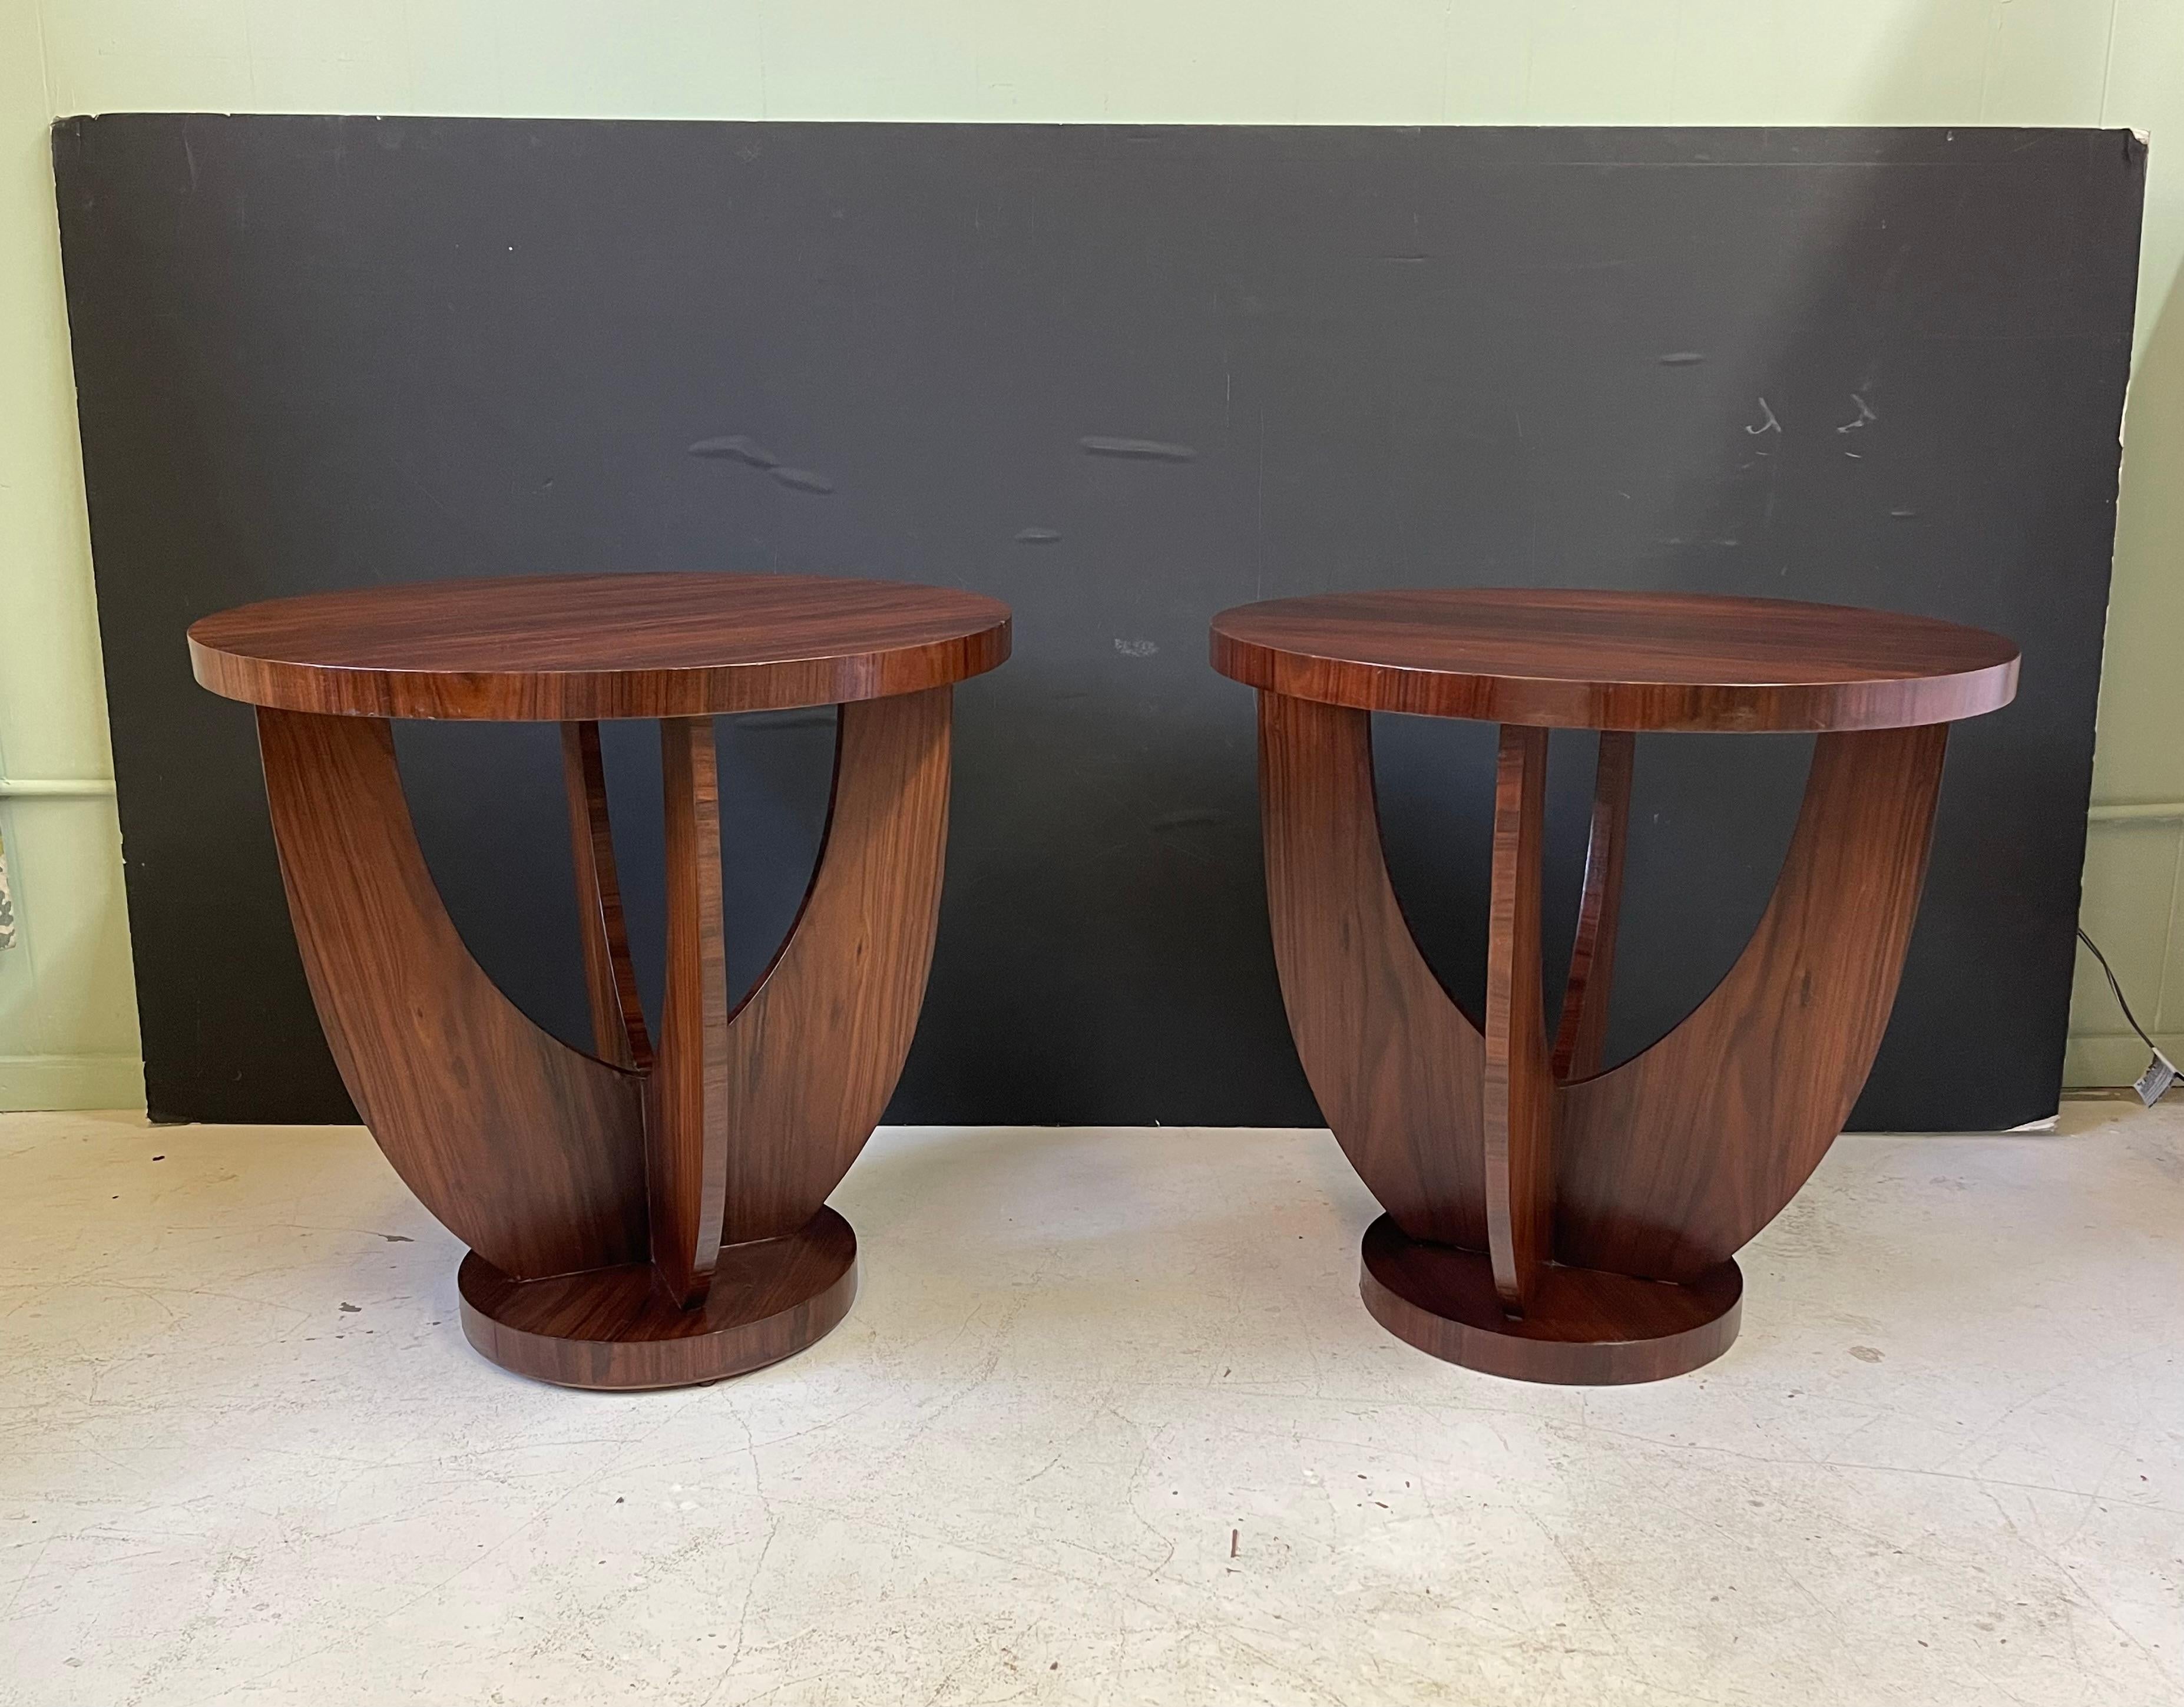 Pair of 20th century French side tables in the style of Art Deco and manner of designer Jules Leleu. They are elegantly made of Brazilian rosewood veneer.